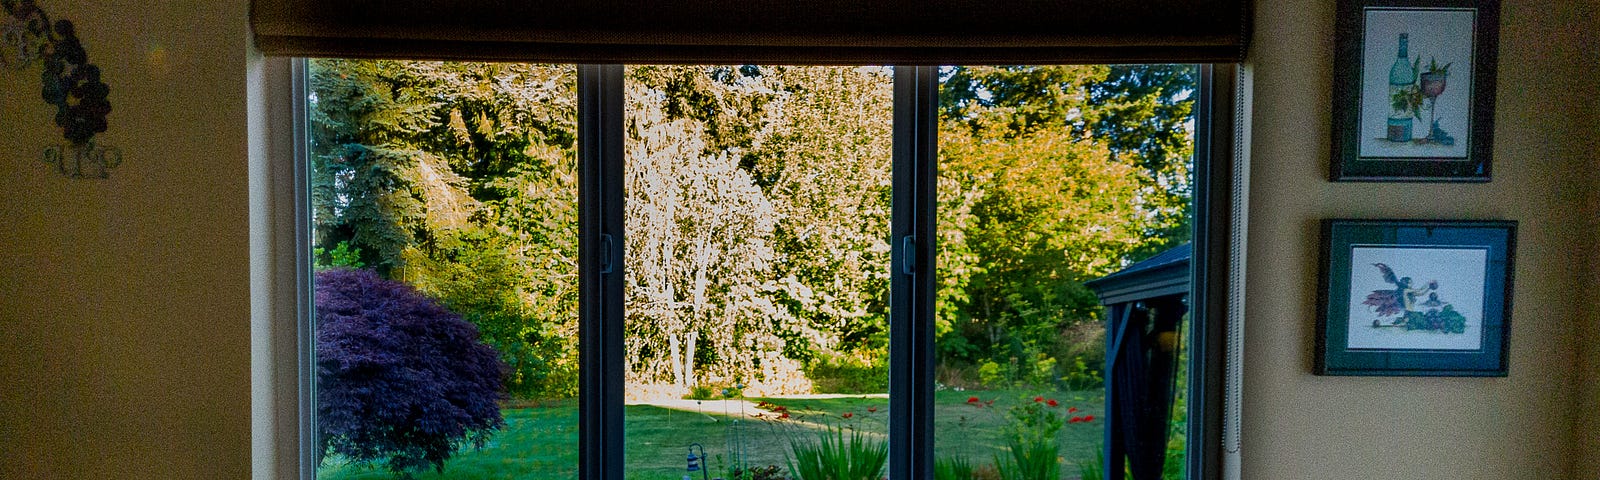 A lush garden seen through a large window, with well-kept lawn, plants, and trees